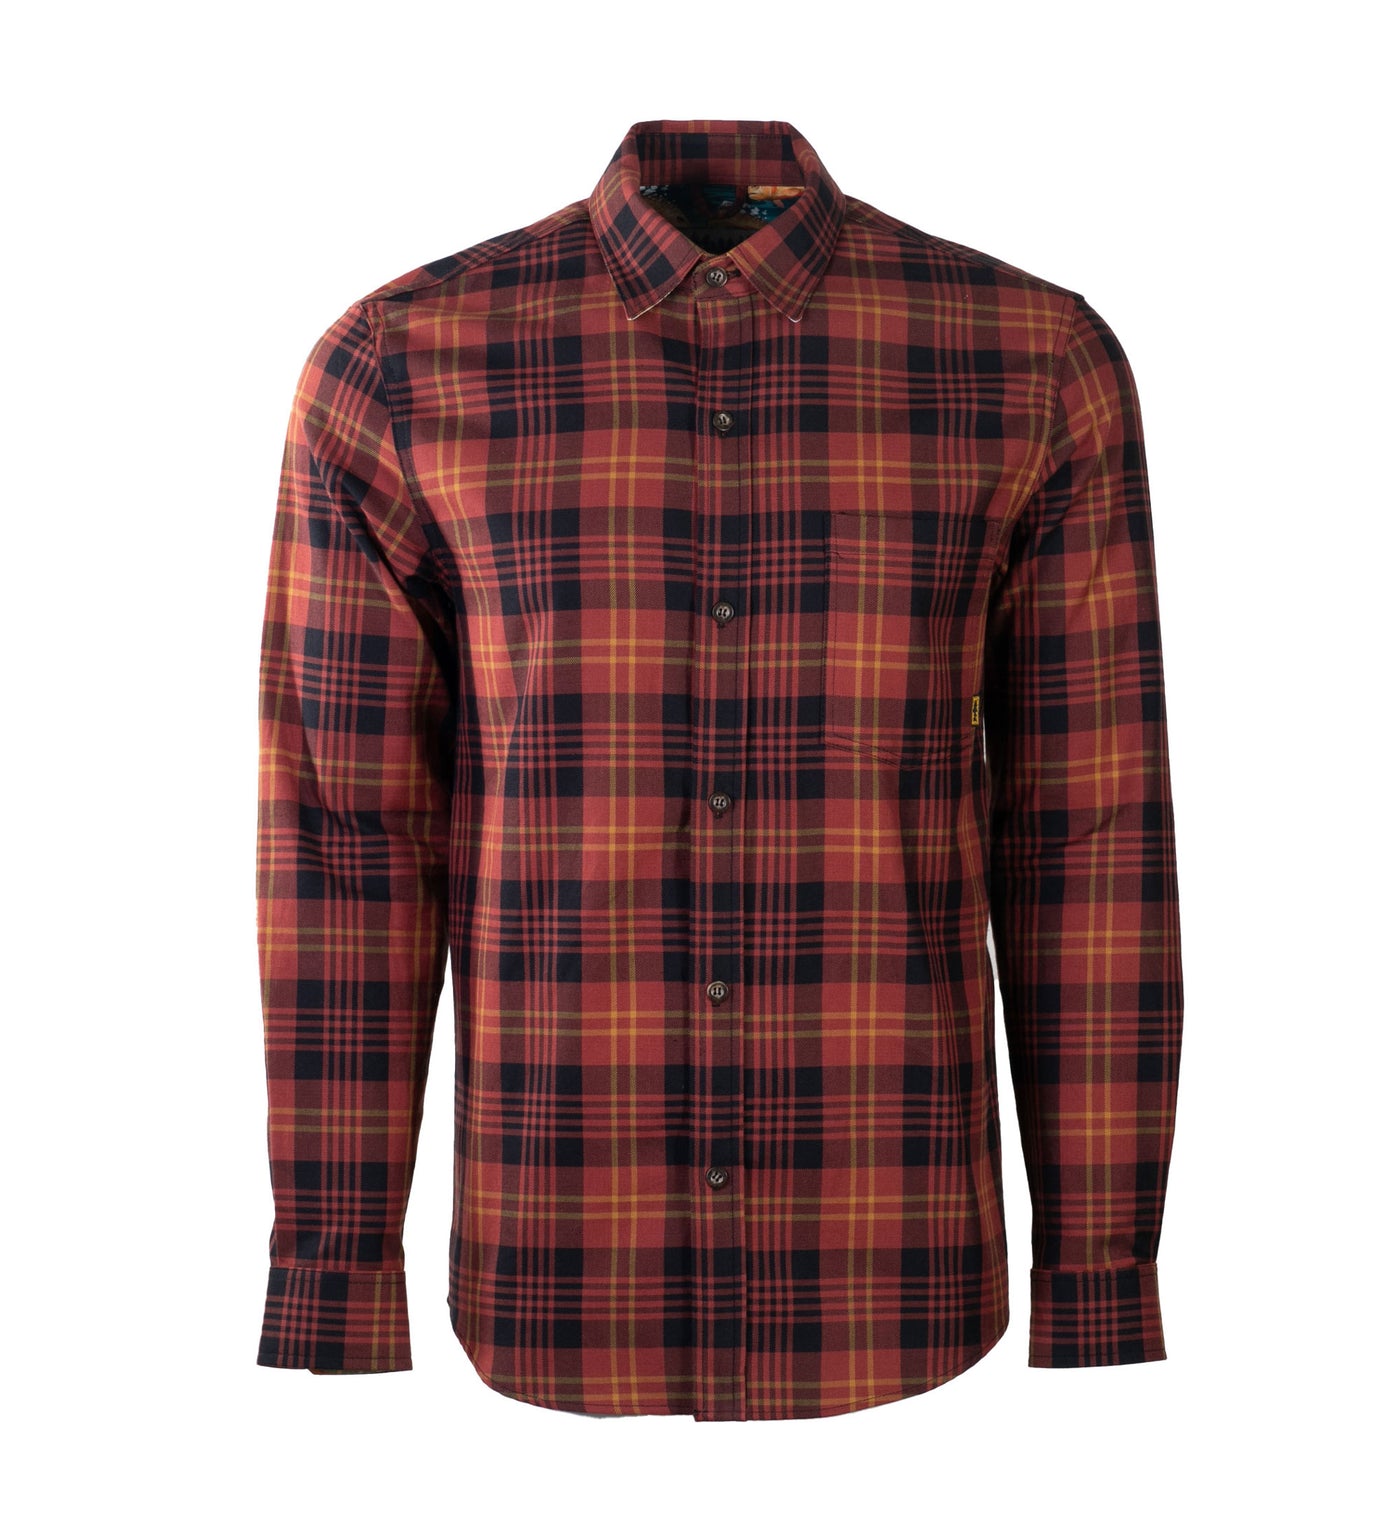 Men's Cypress Every Wear Flannel Shirt- Watershed Red